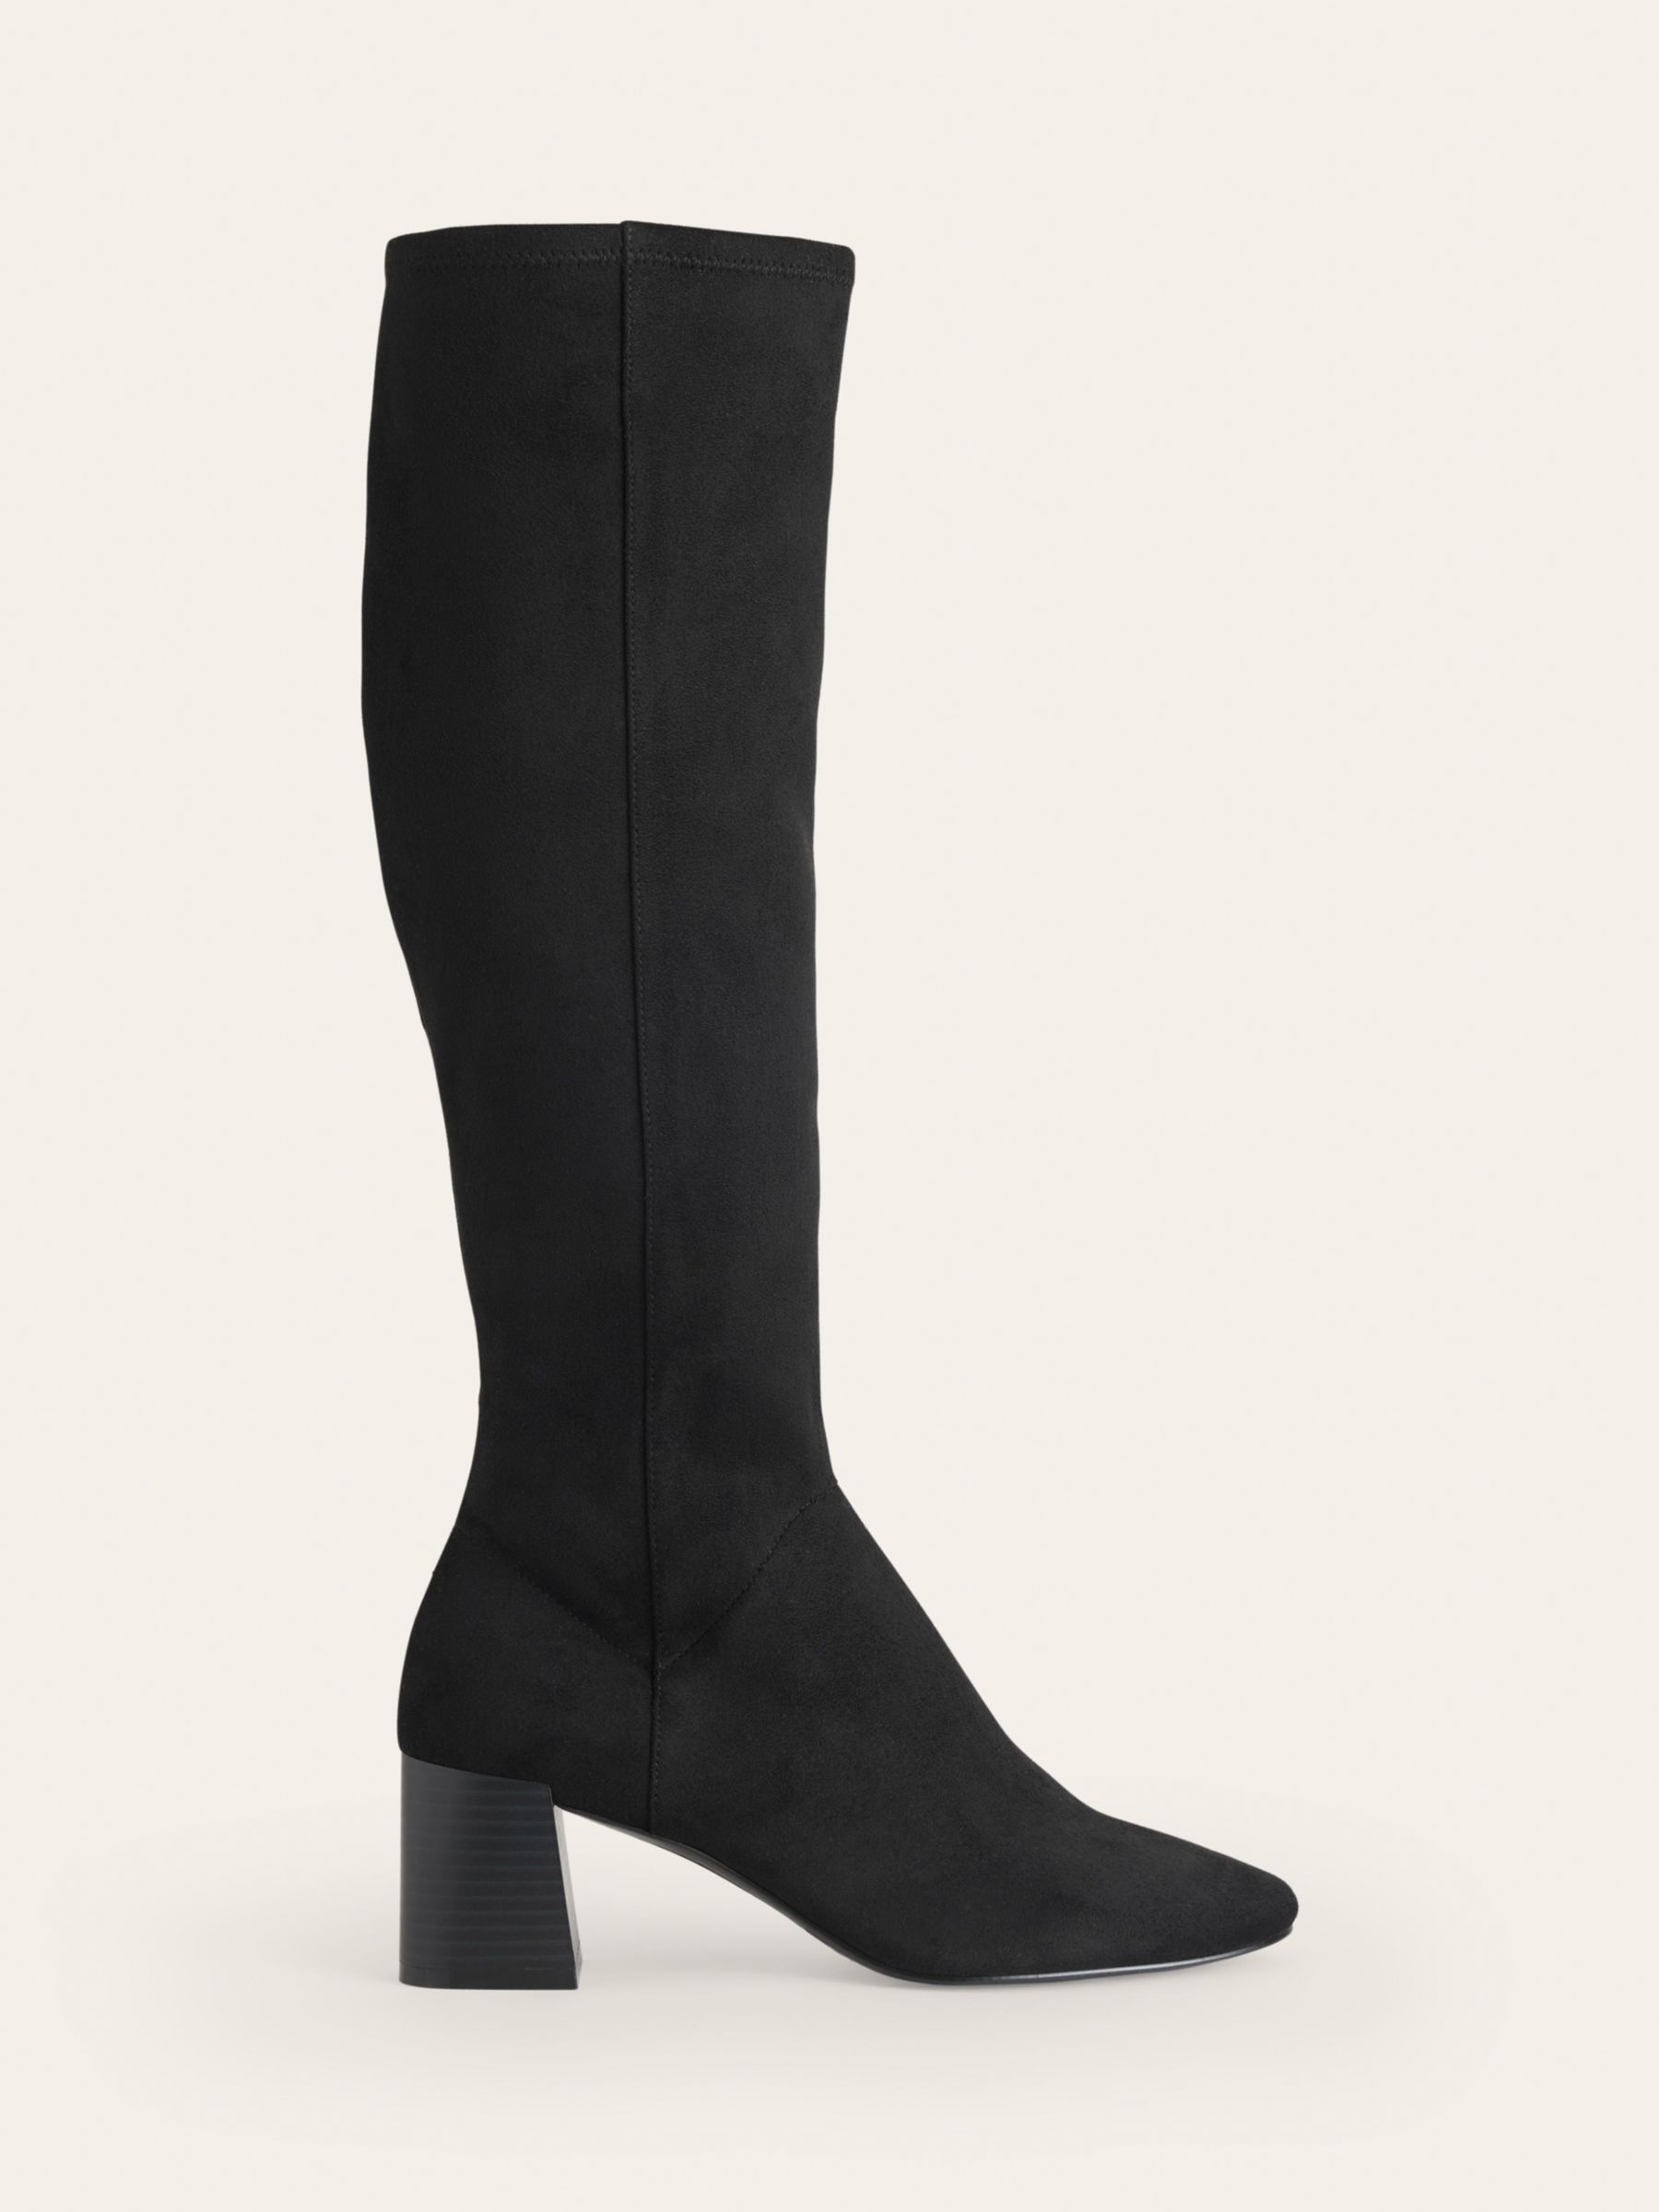 Boden Cara Heeled Stretch Knee Boots, Black at John Lewis & Partners